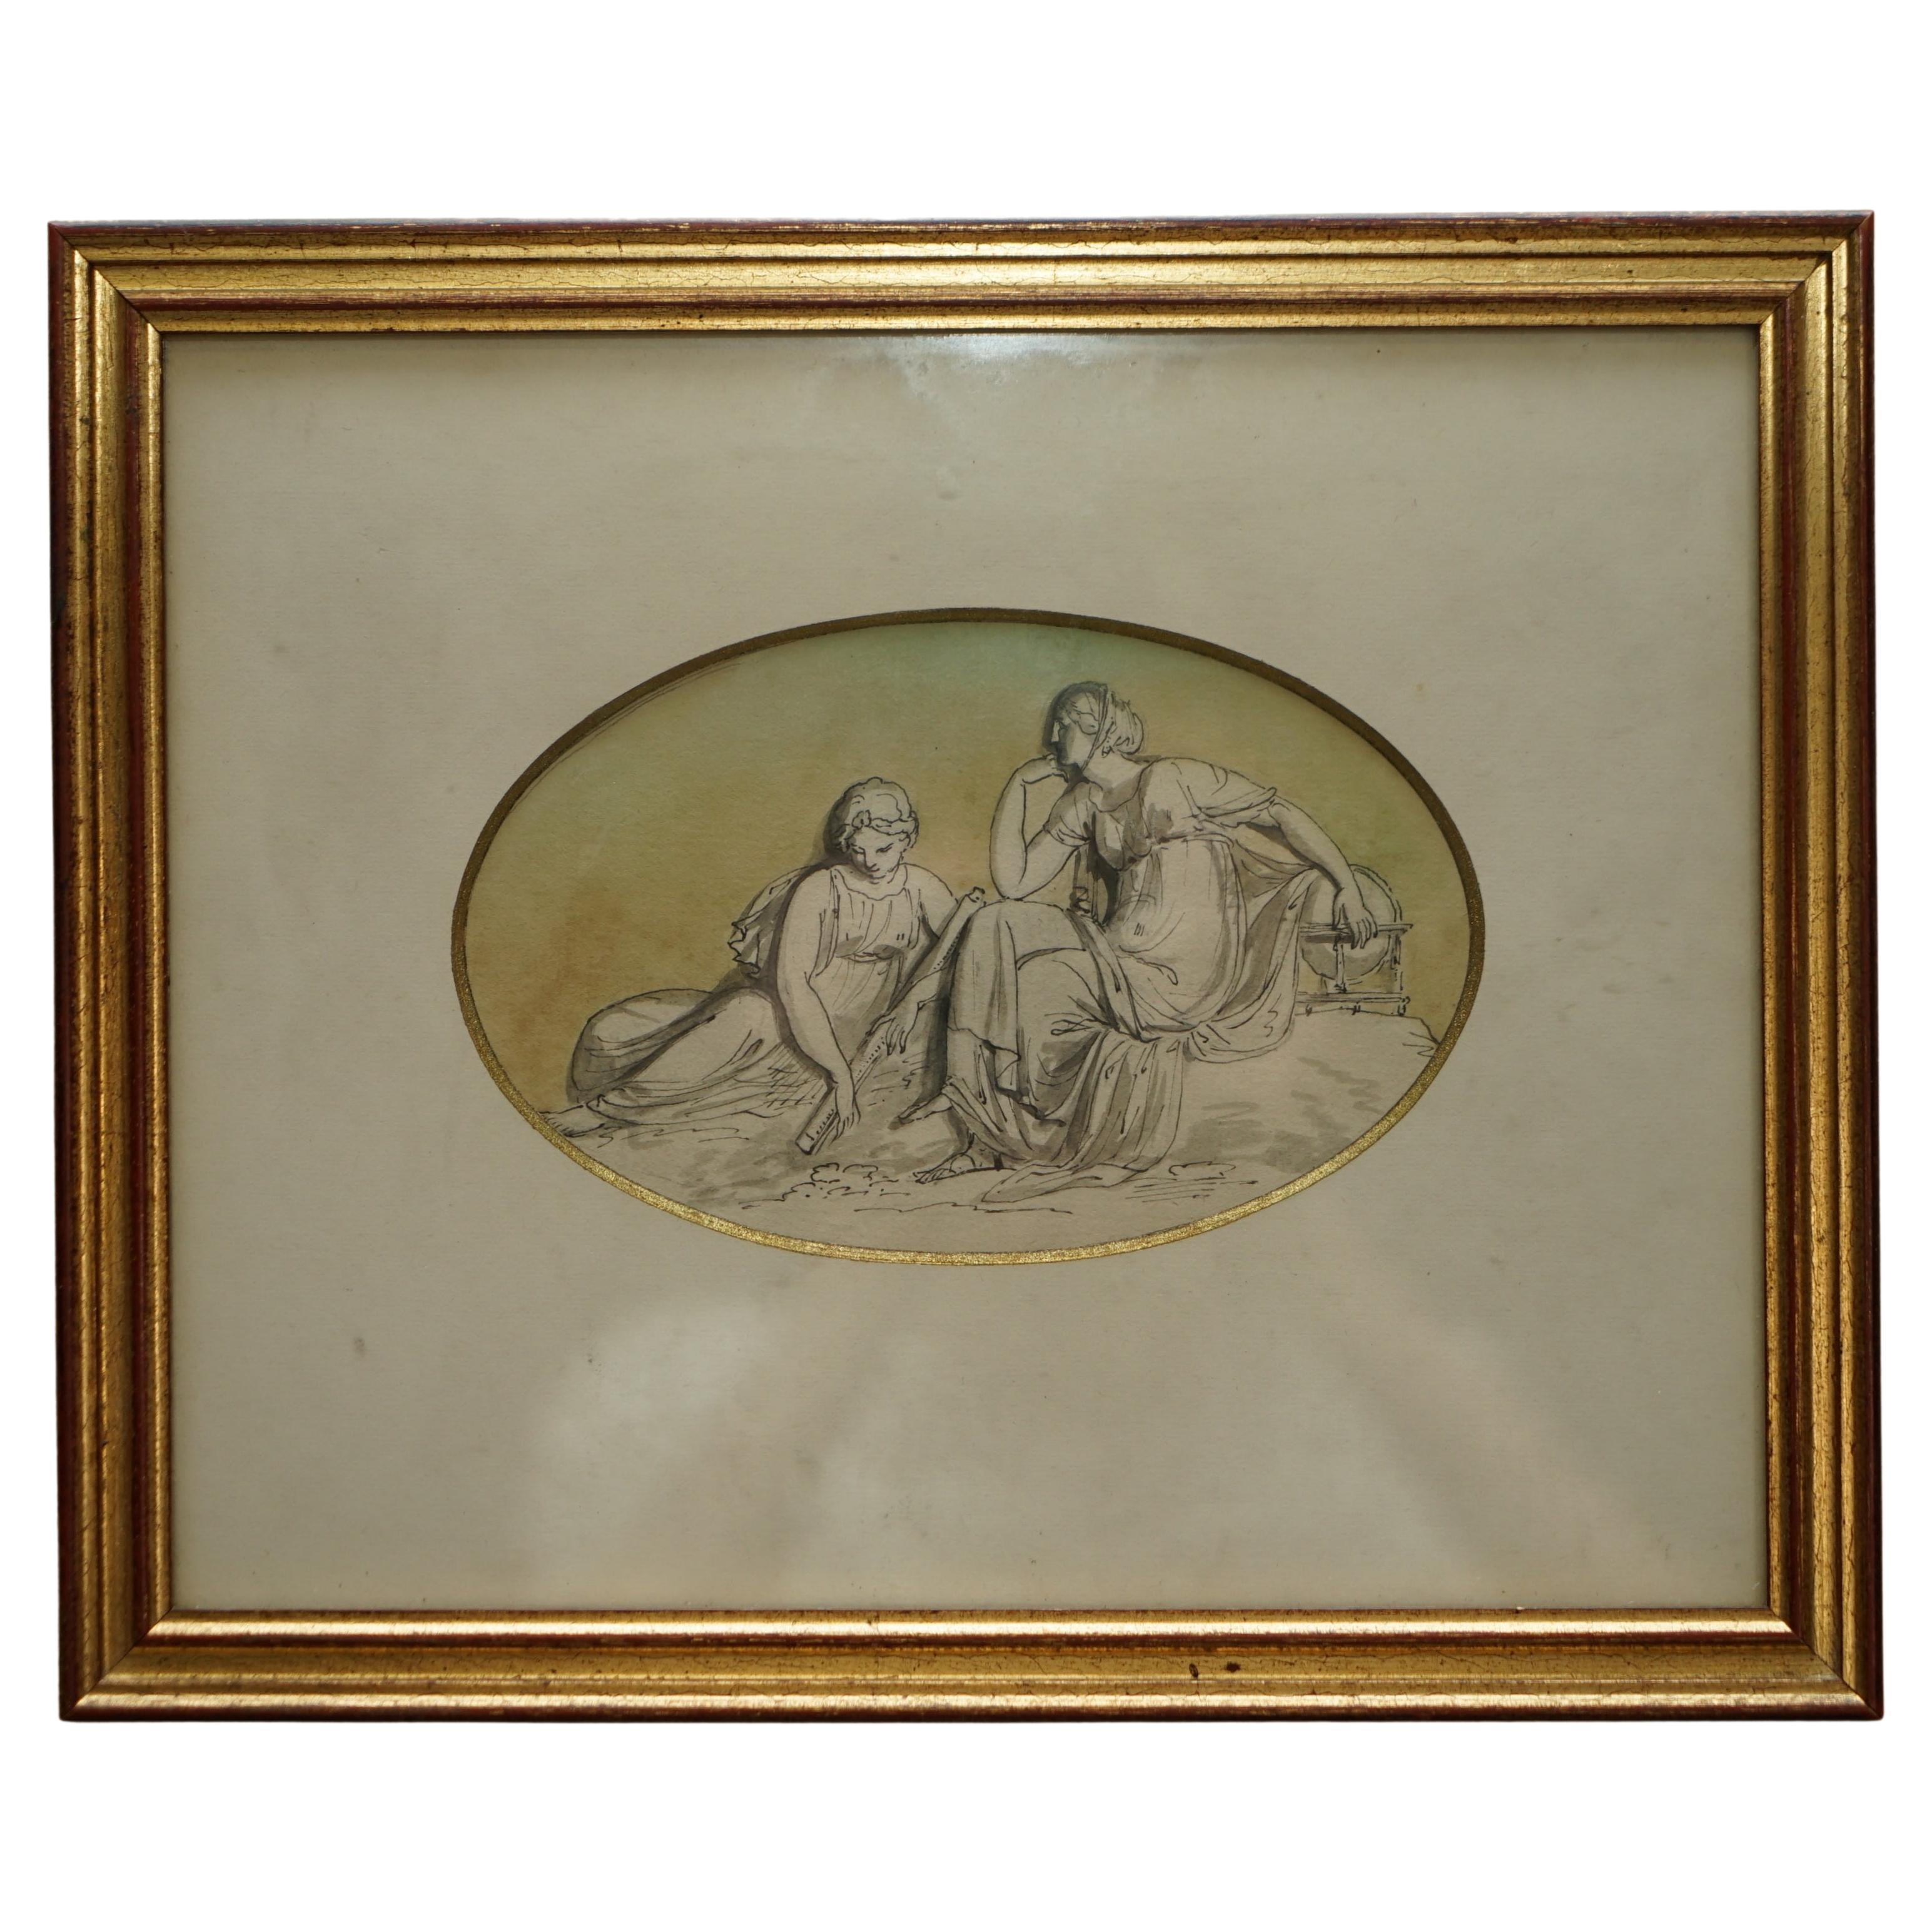 Angelica Kauffman 1741-1807 Attributed Roman Grand Tour Watercolor Painting